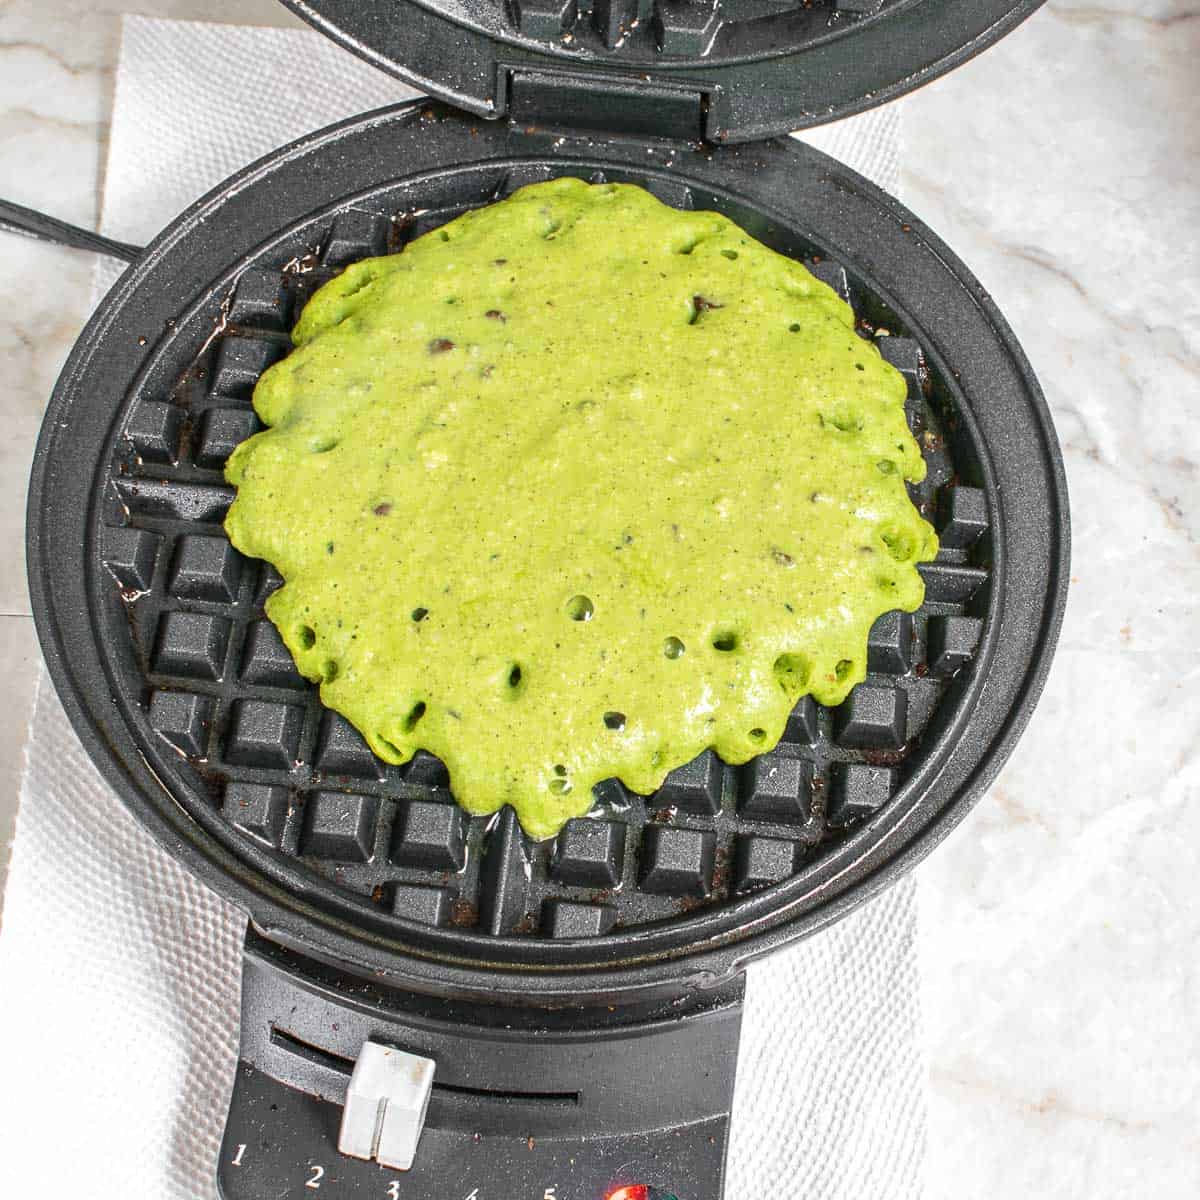 batter being cooked in the waffle maker.